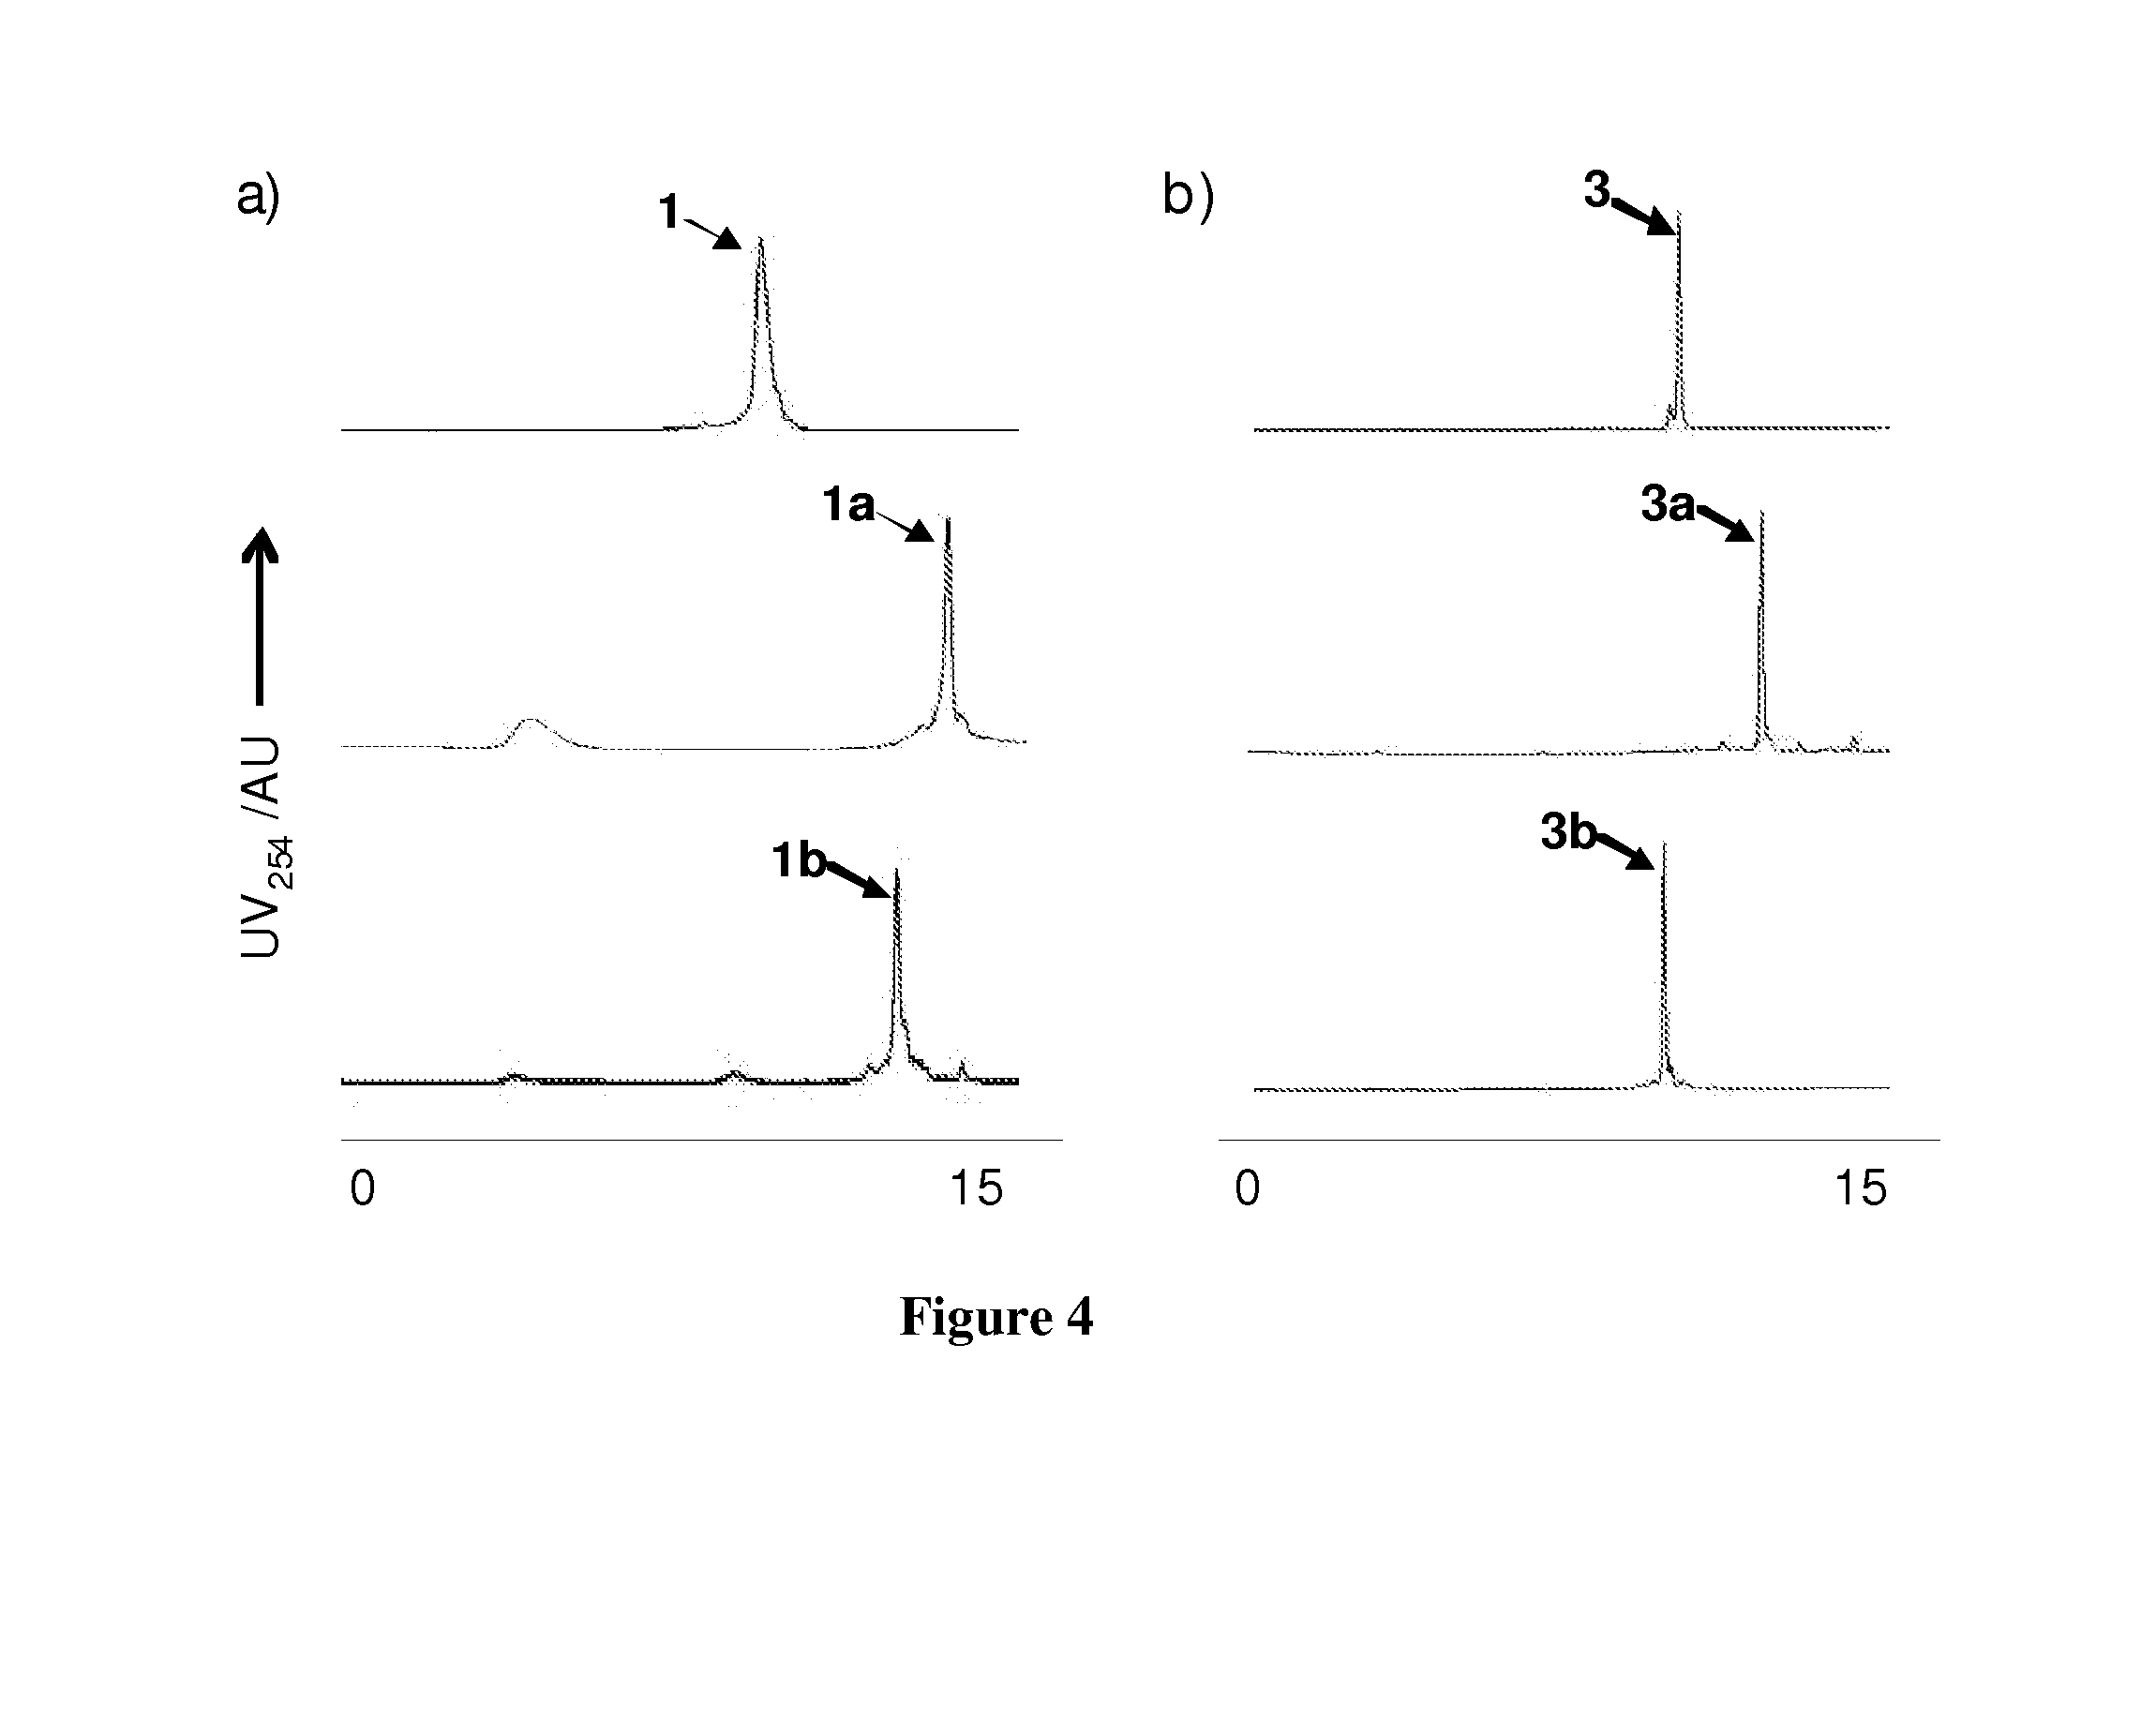 Cross-Linked Peptides and Proteins, Methods of Making Same, and Uses Thereof